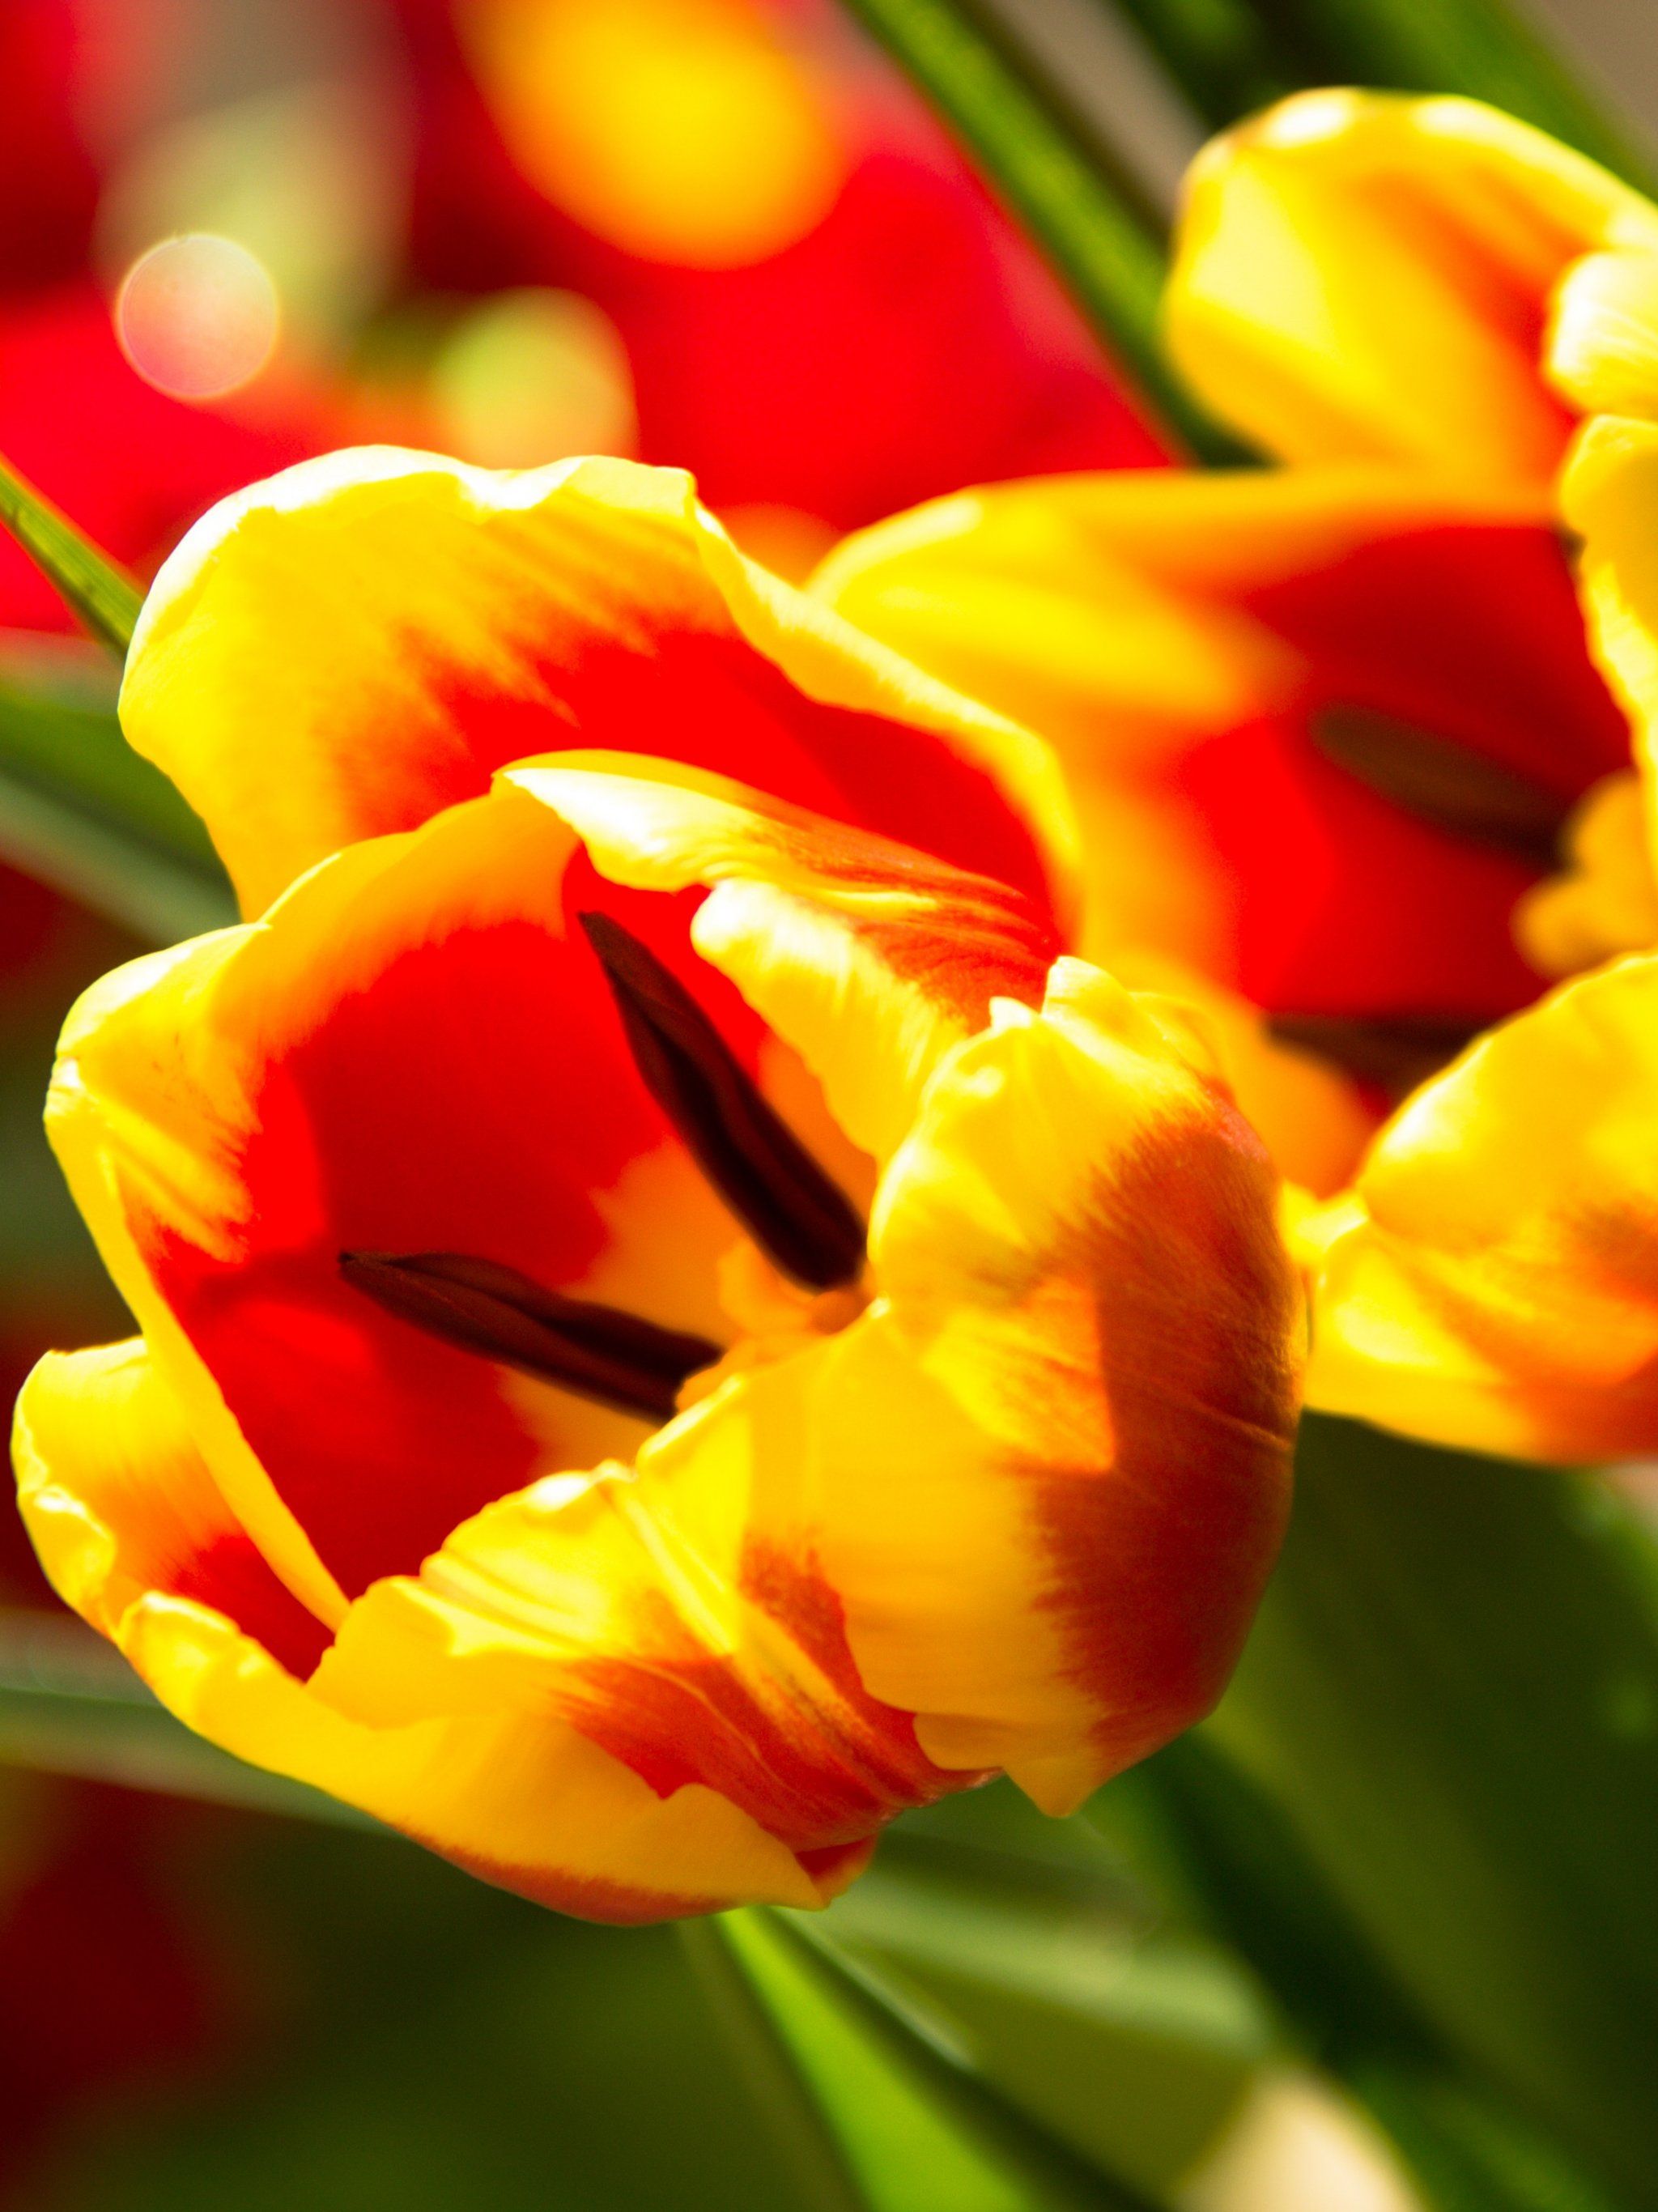 A close up of a bunch of yellow and red tulips. - Tulip